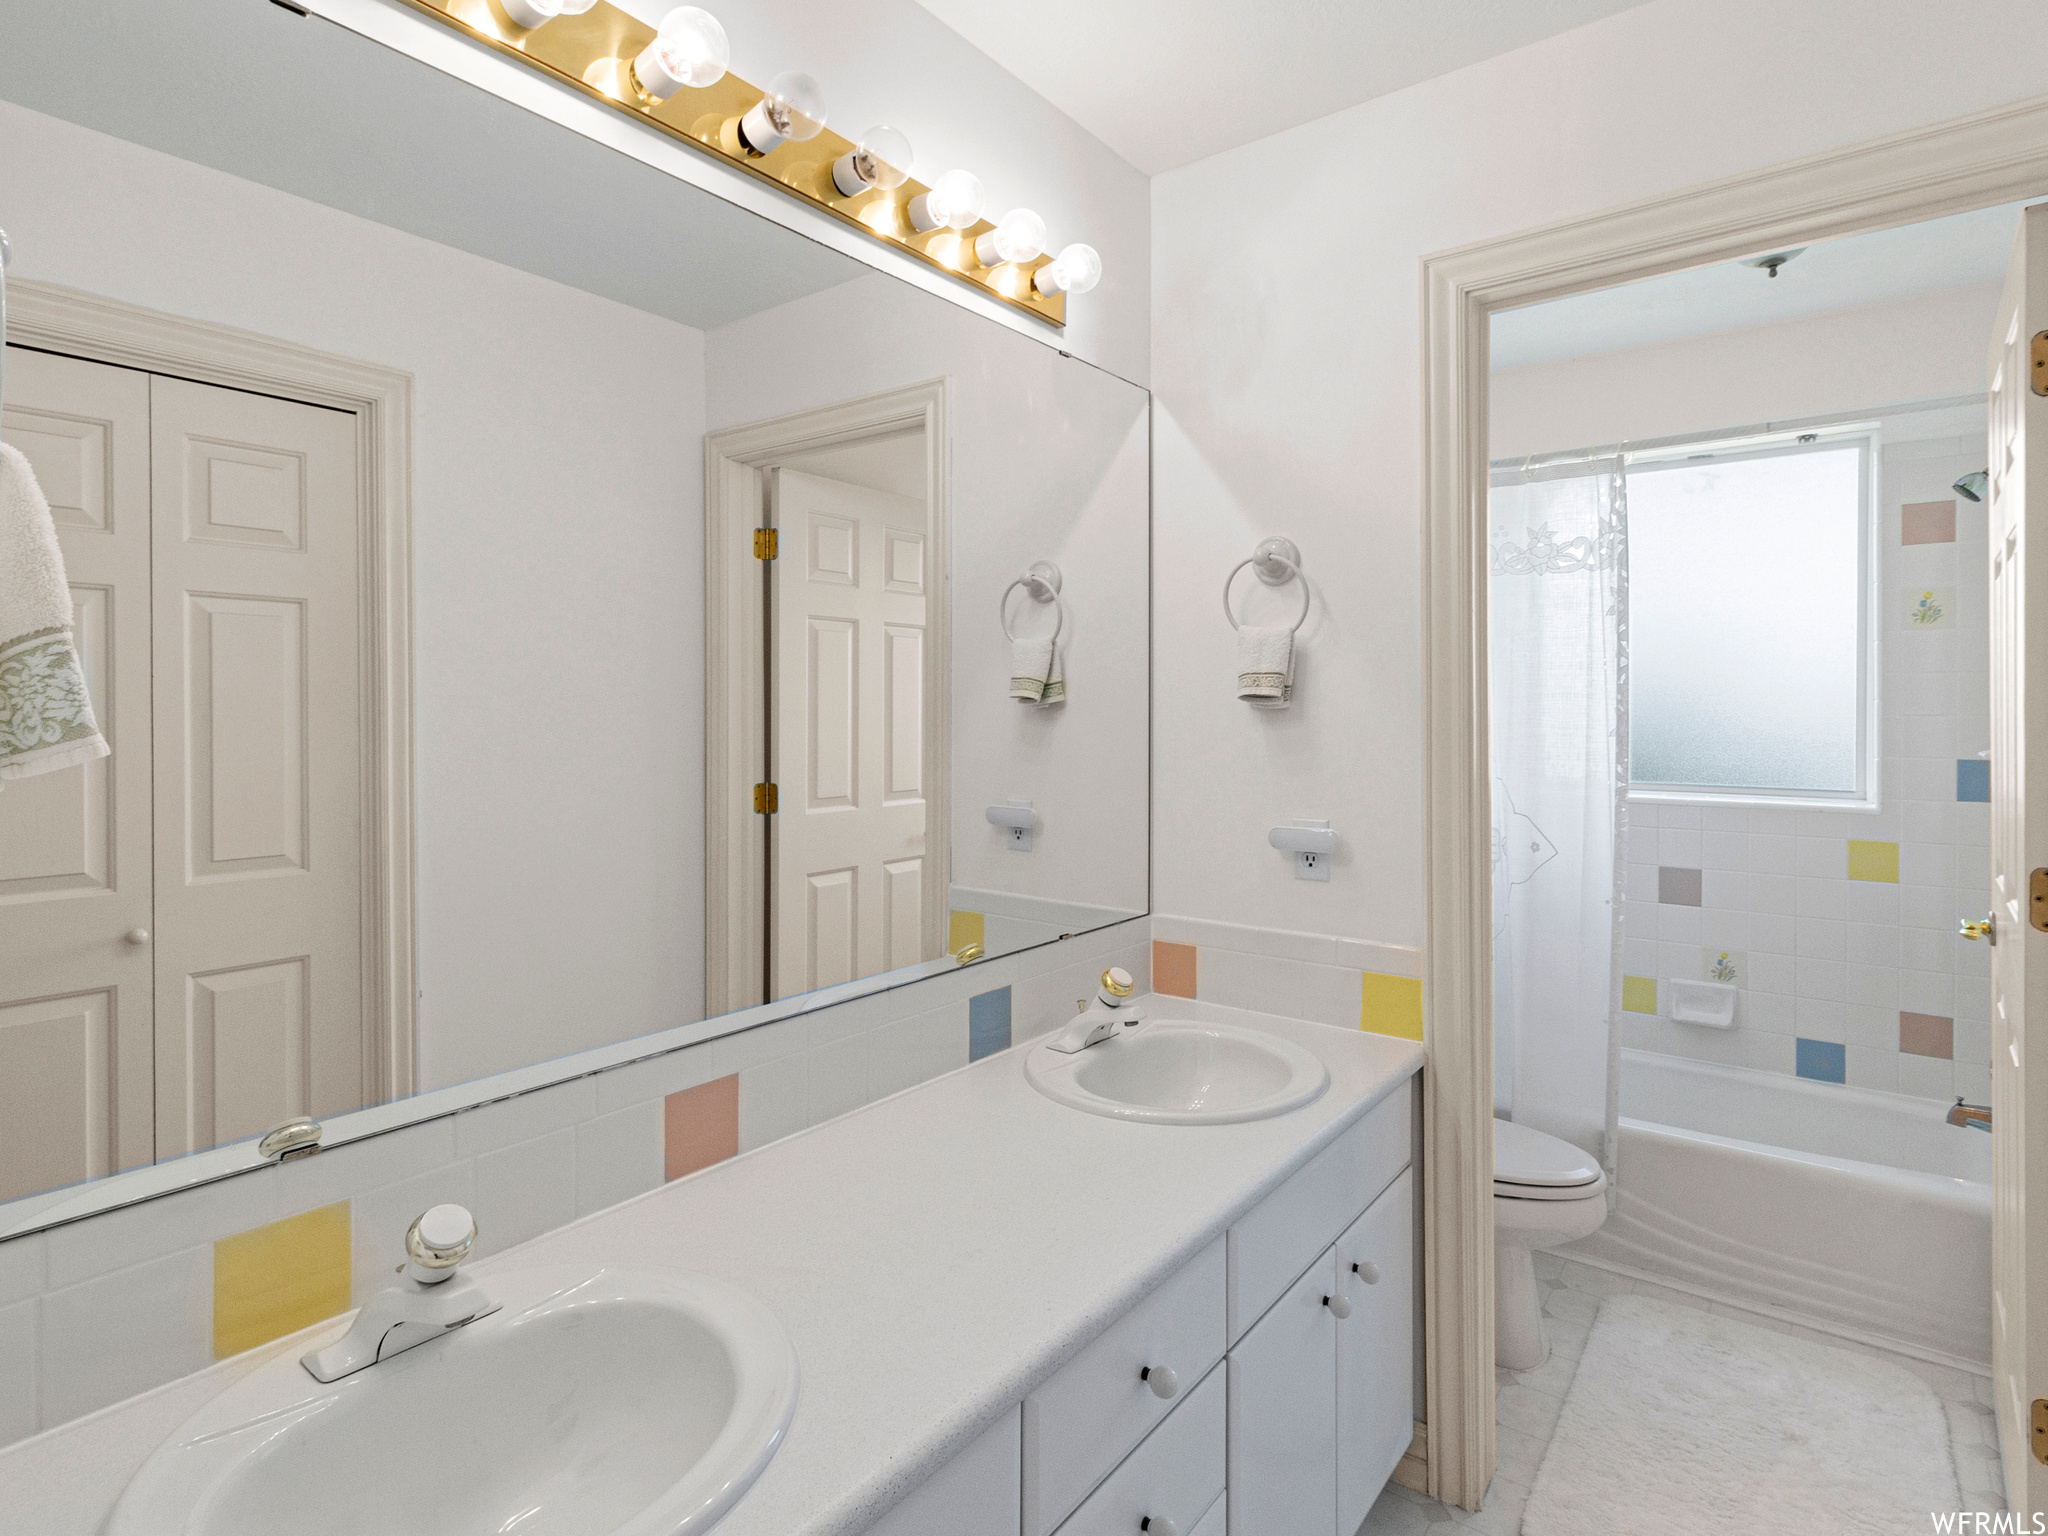 Full bathroom with tiled shower / bath combo, dual large vanity, light tile flooring, and mirror